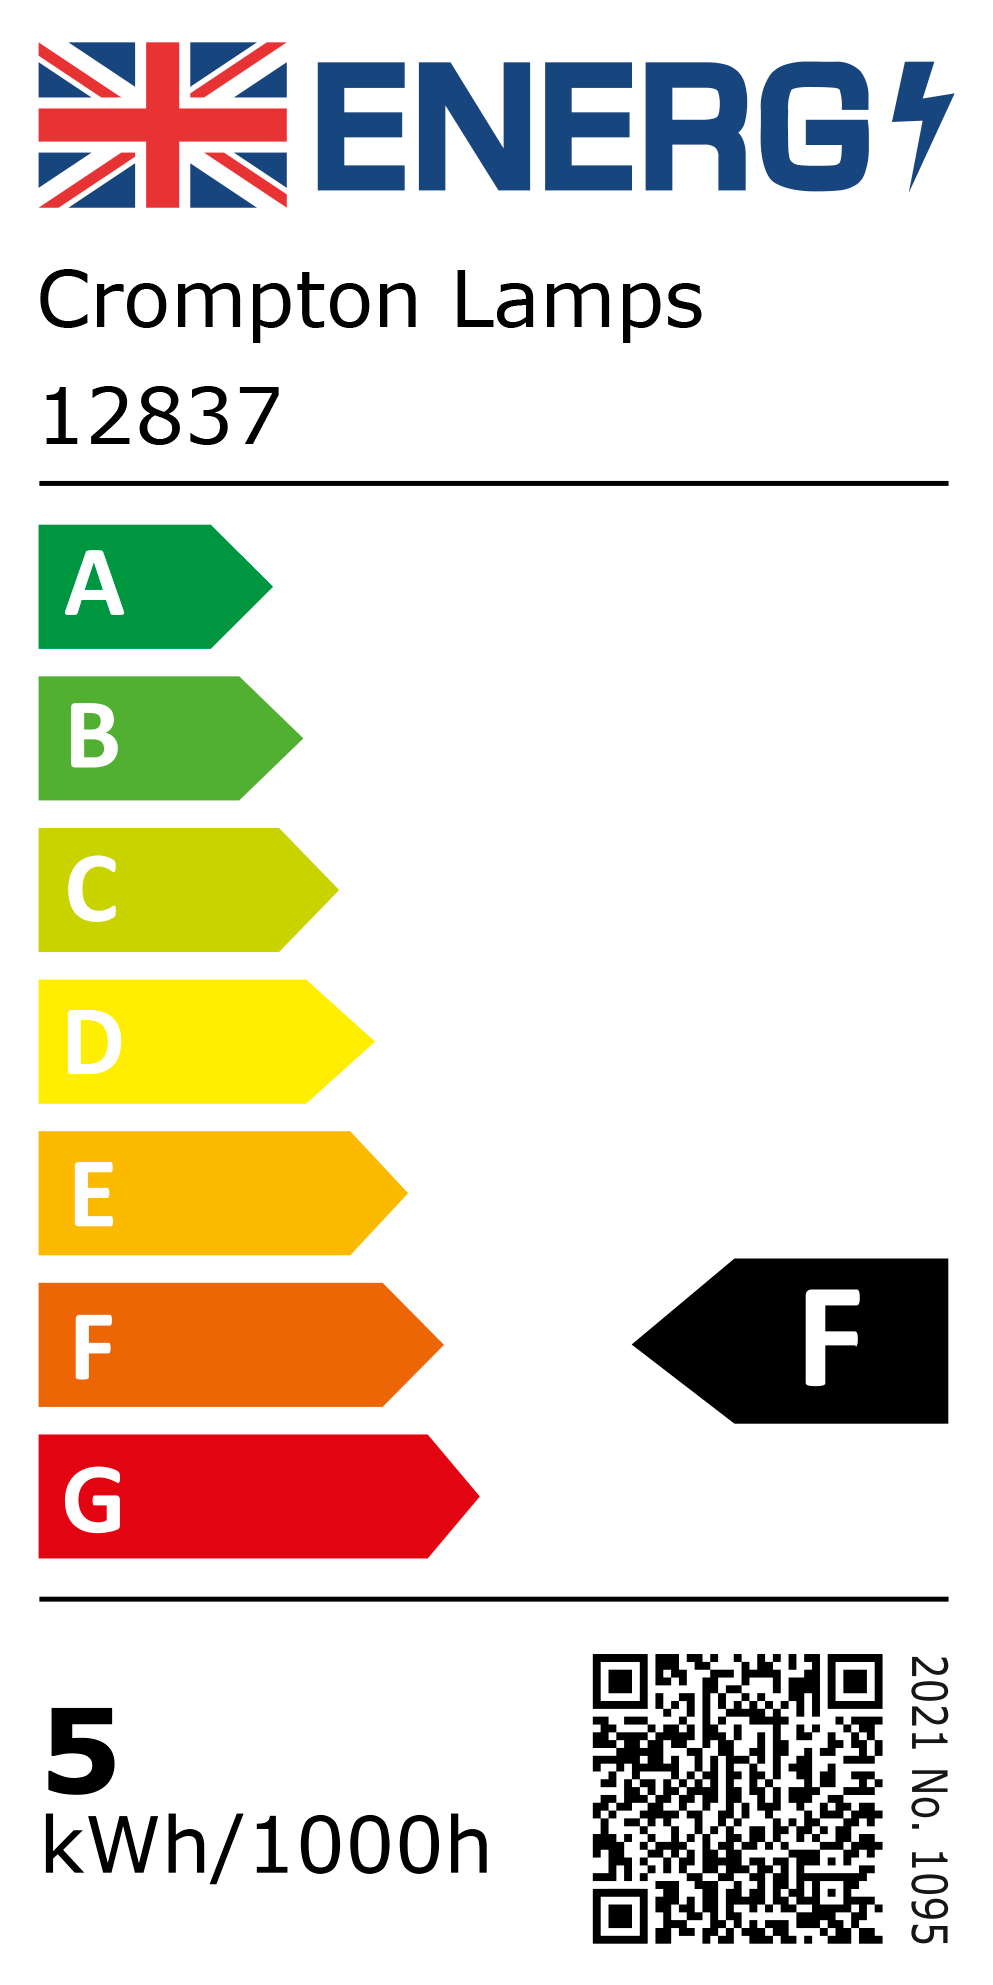 New 2021 Energy Rating Label: Stock Code 12837